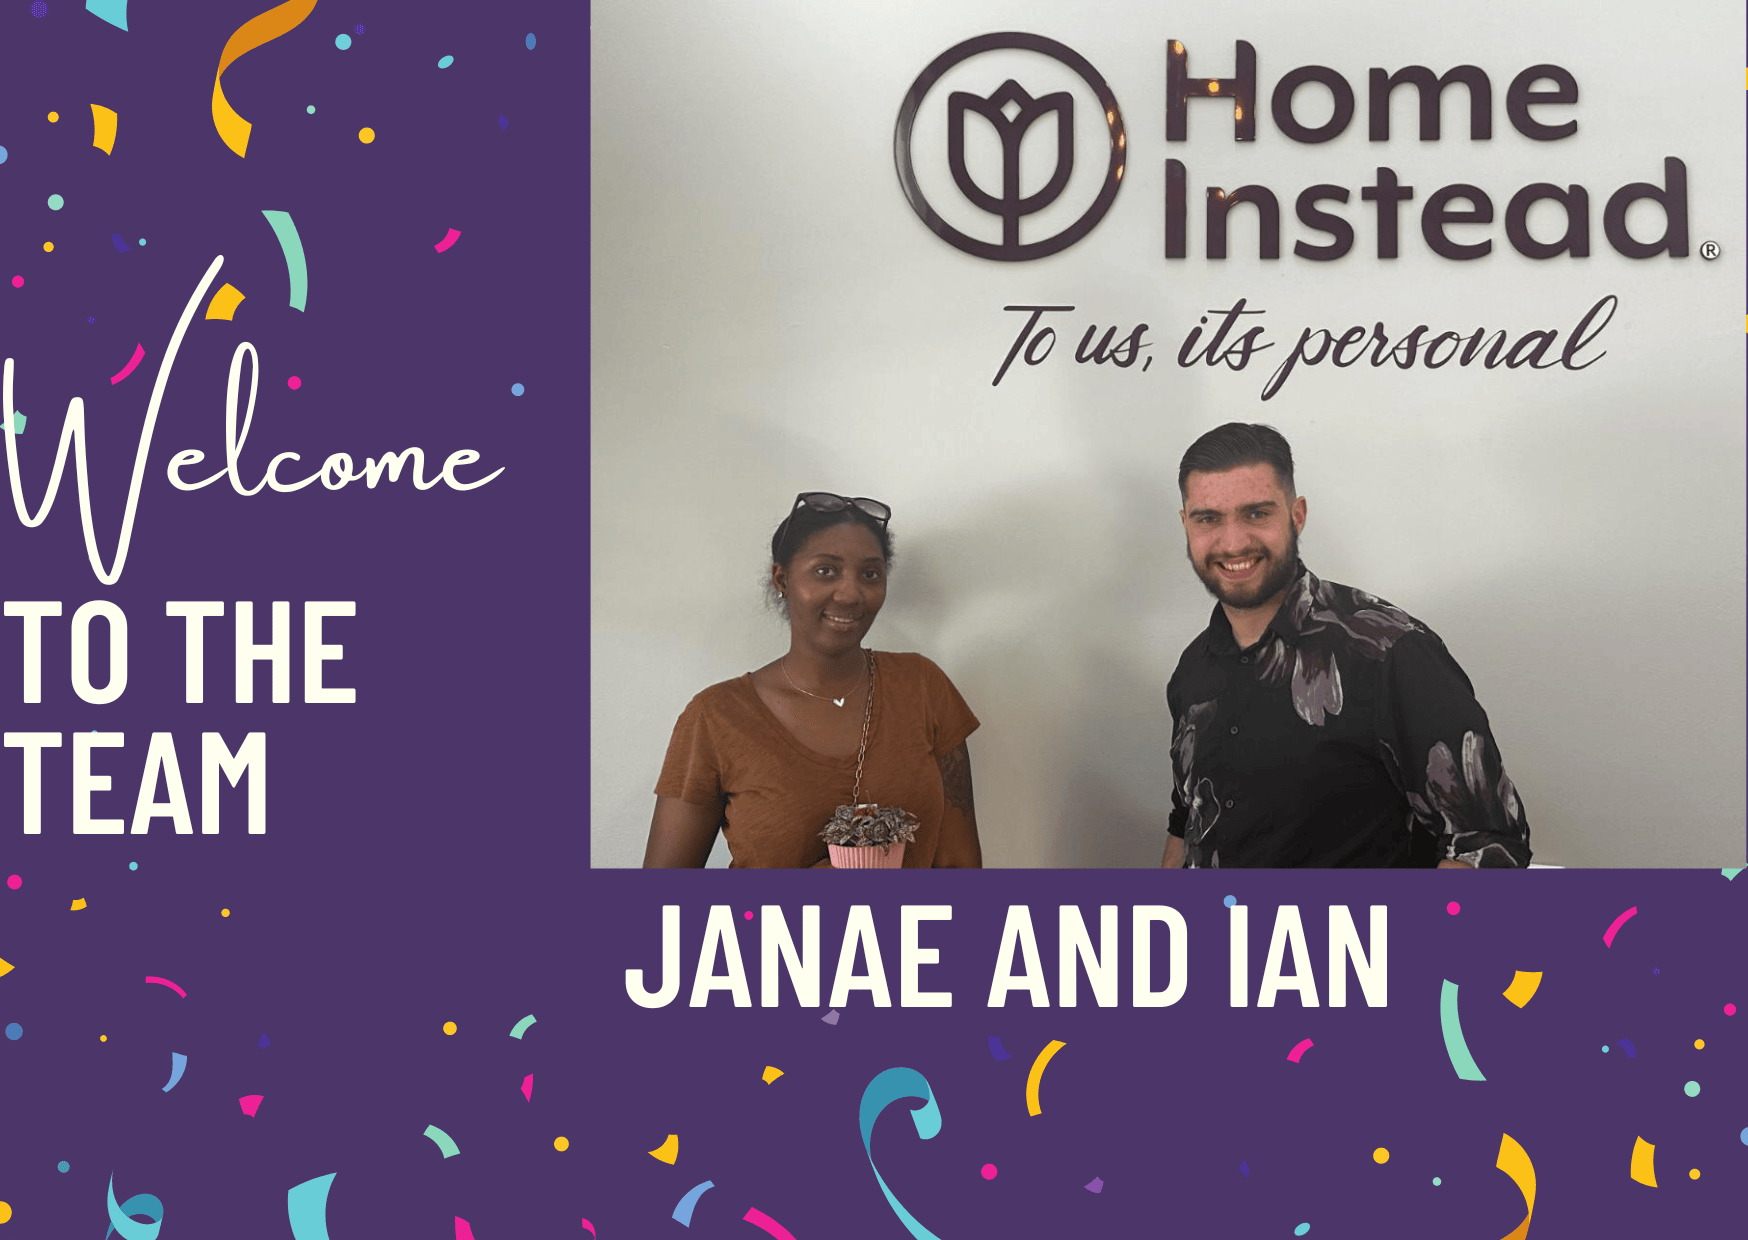 New Home Instead Care Pros Janea and Ian